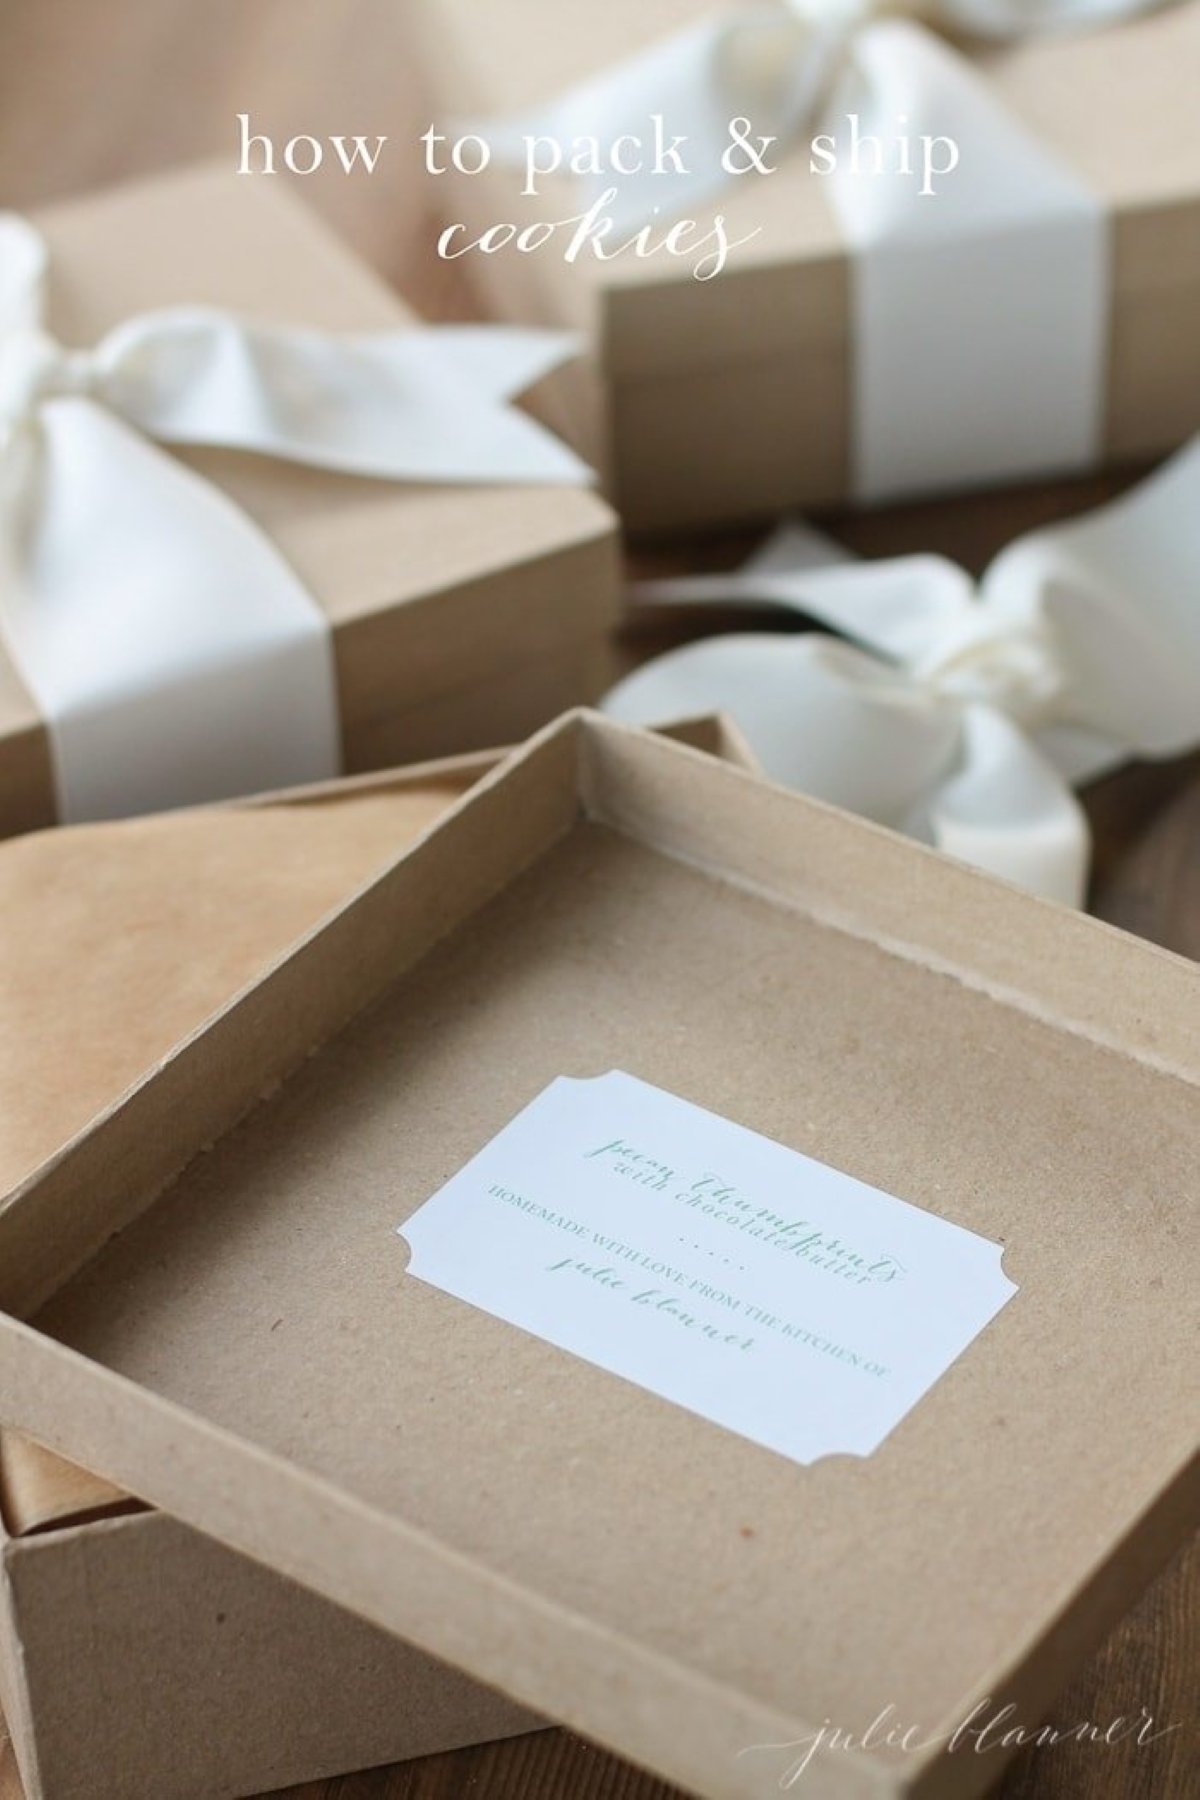 Brown kraft paper boxes tied with white satin bows. One box is open with a tag about cookies, text overlay reads "How to package and ship cookies"